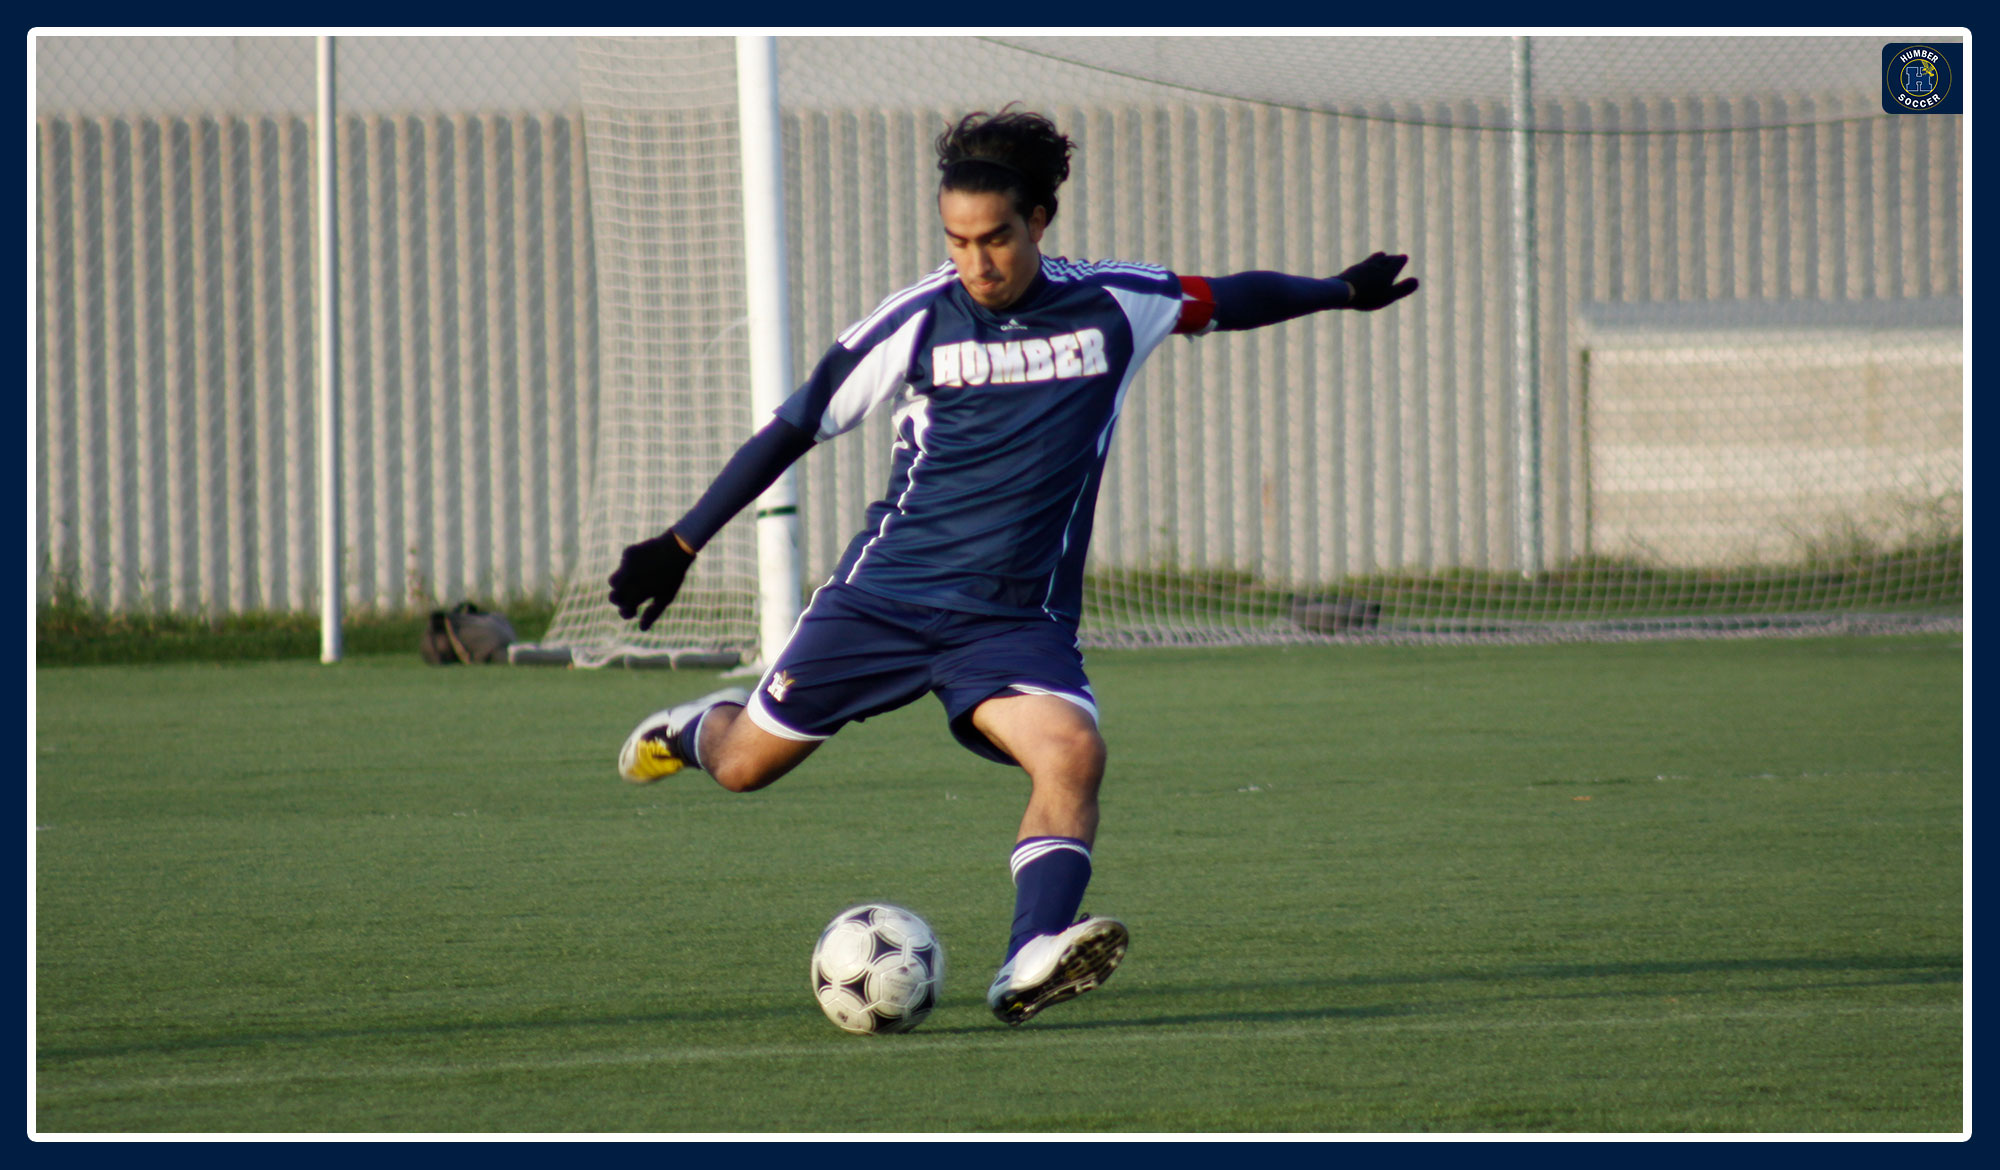 Marcelo kicking the soccer ball in a match for Humber in 2011